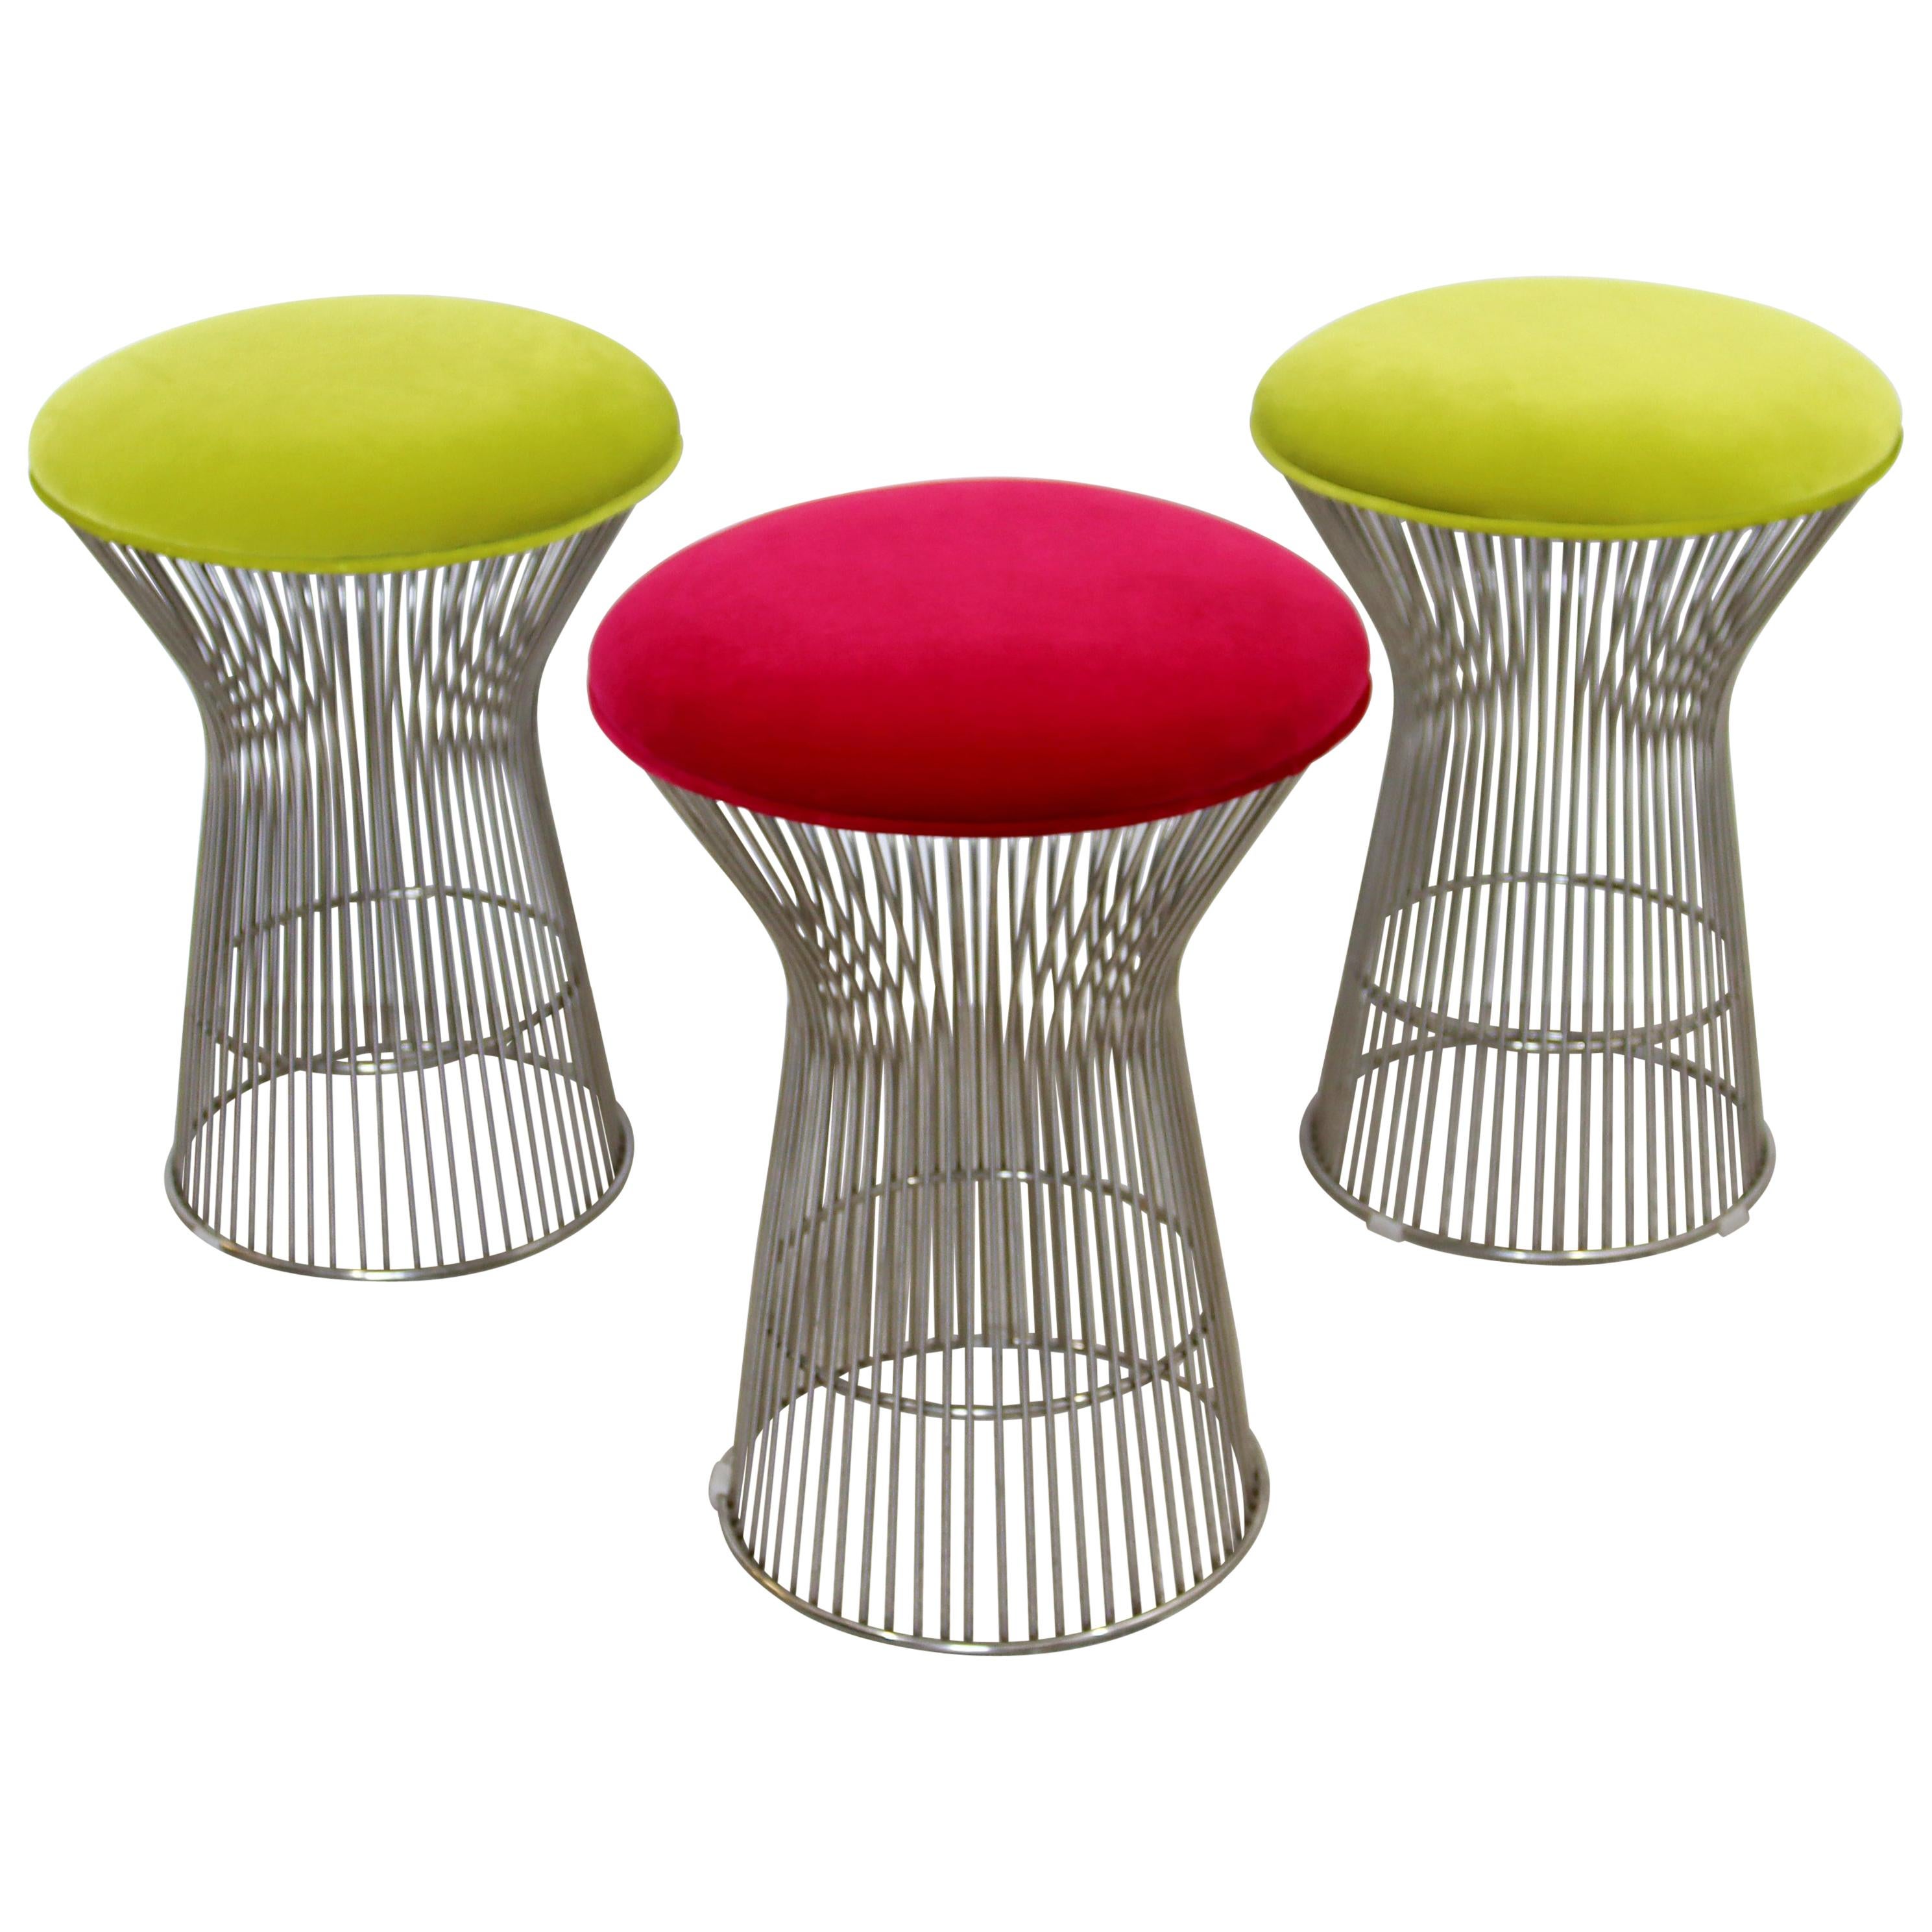 Contemporary Modernist Warren Platner Style Set of 3 Chrome Wire Stools Seats